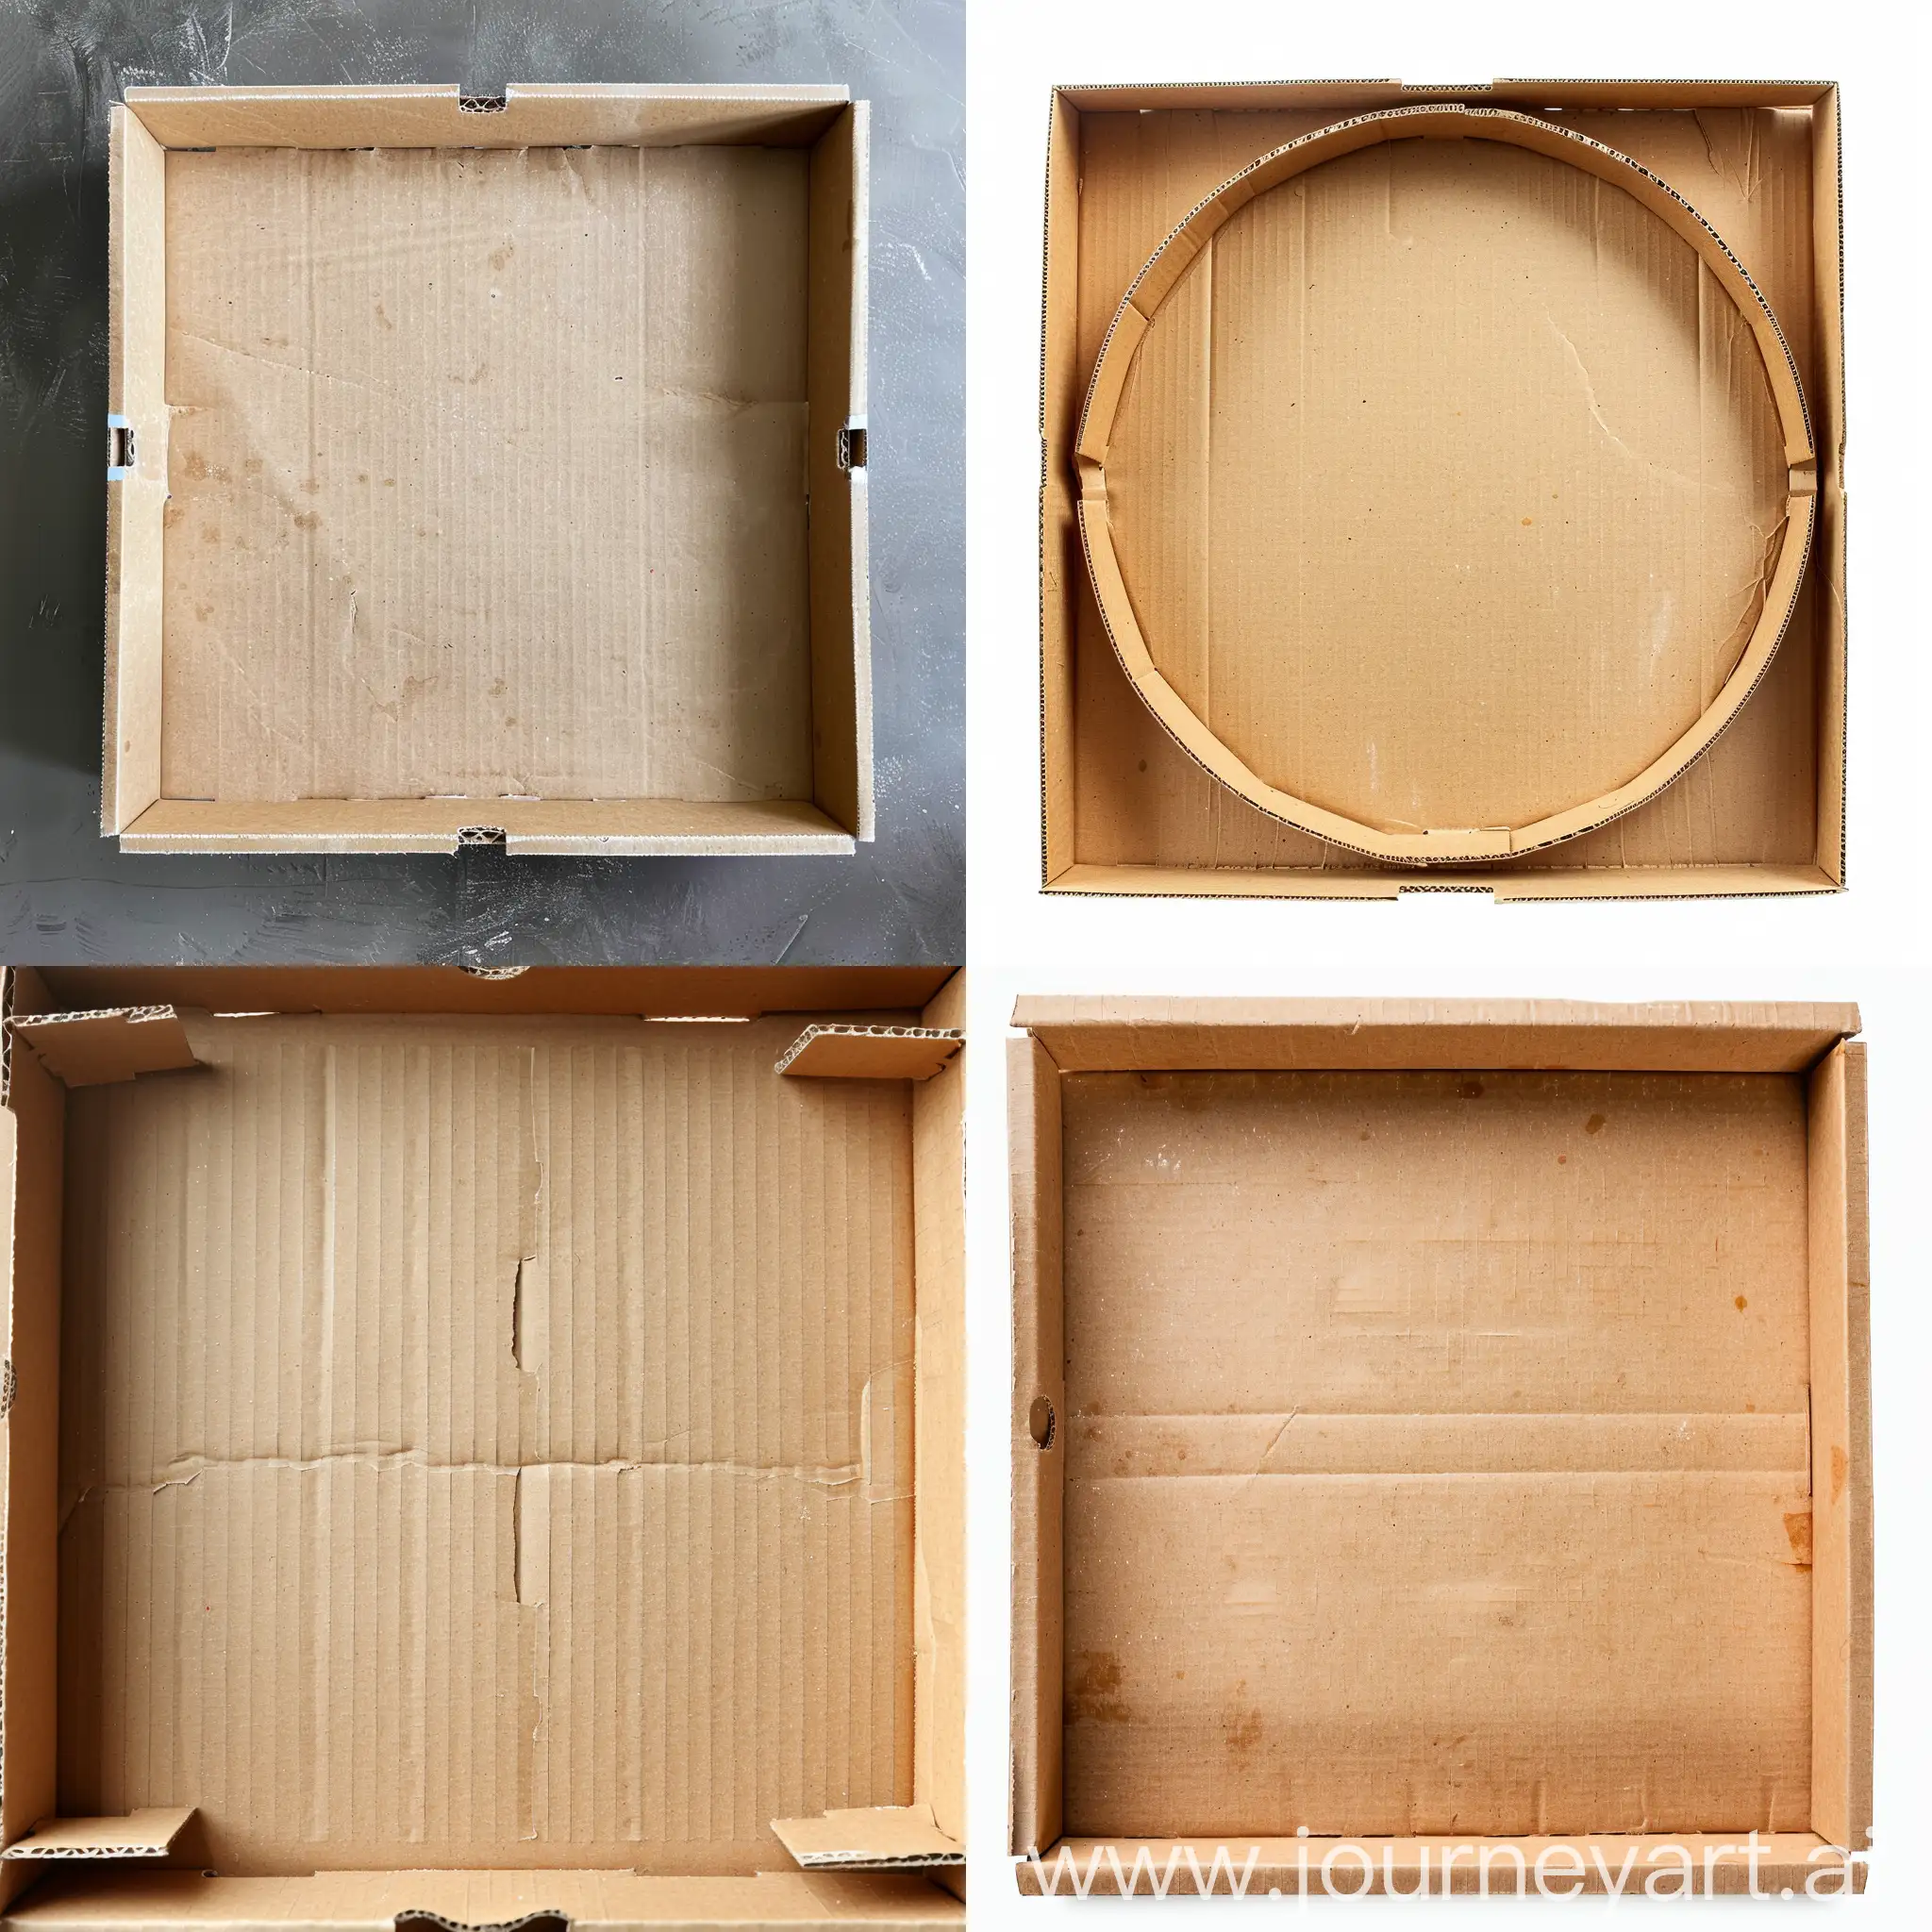 Top-View-of-Empty-Cardboard-Pizza-Box